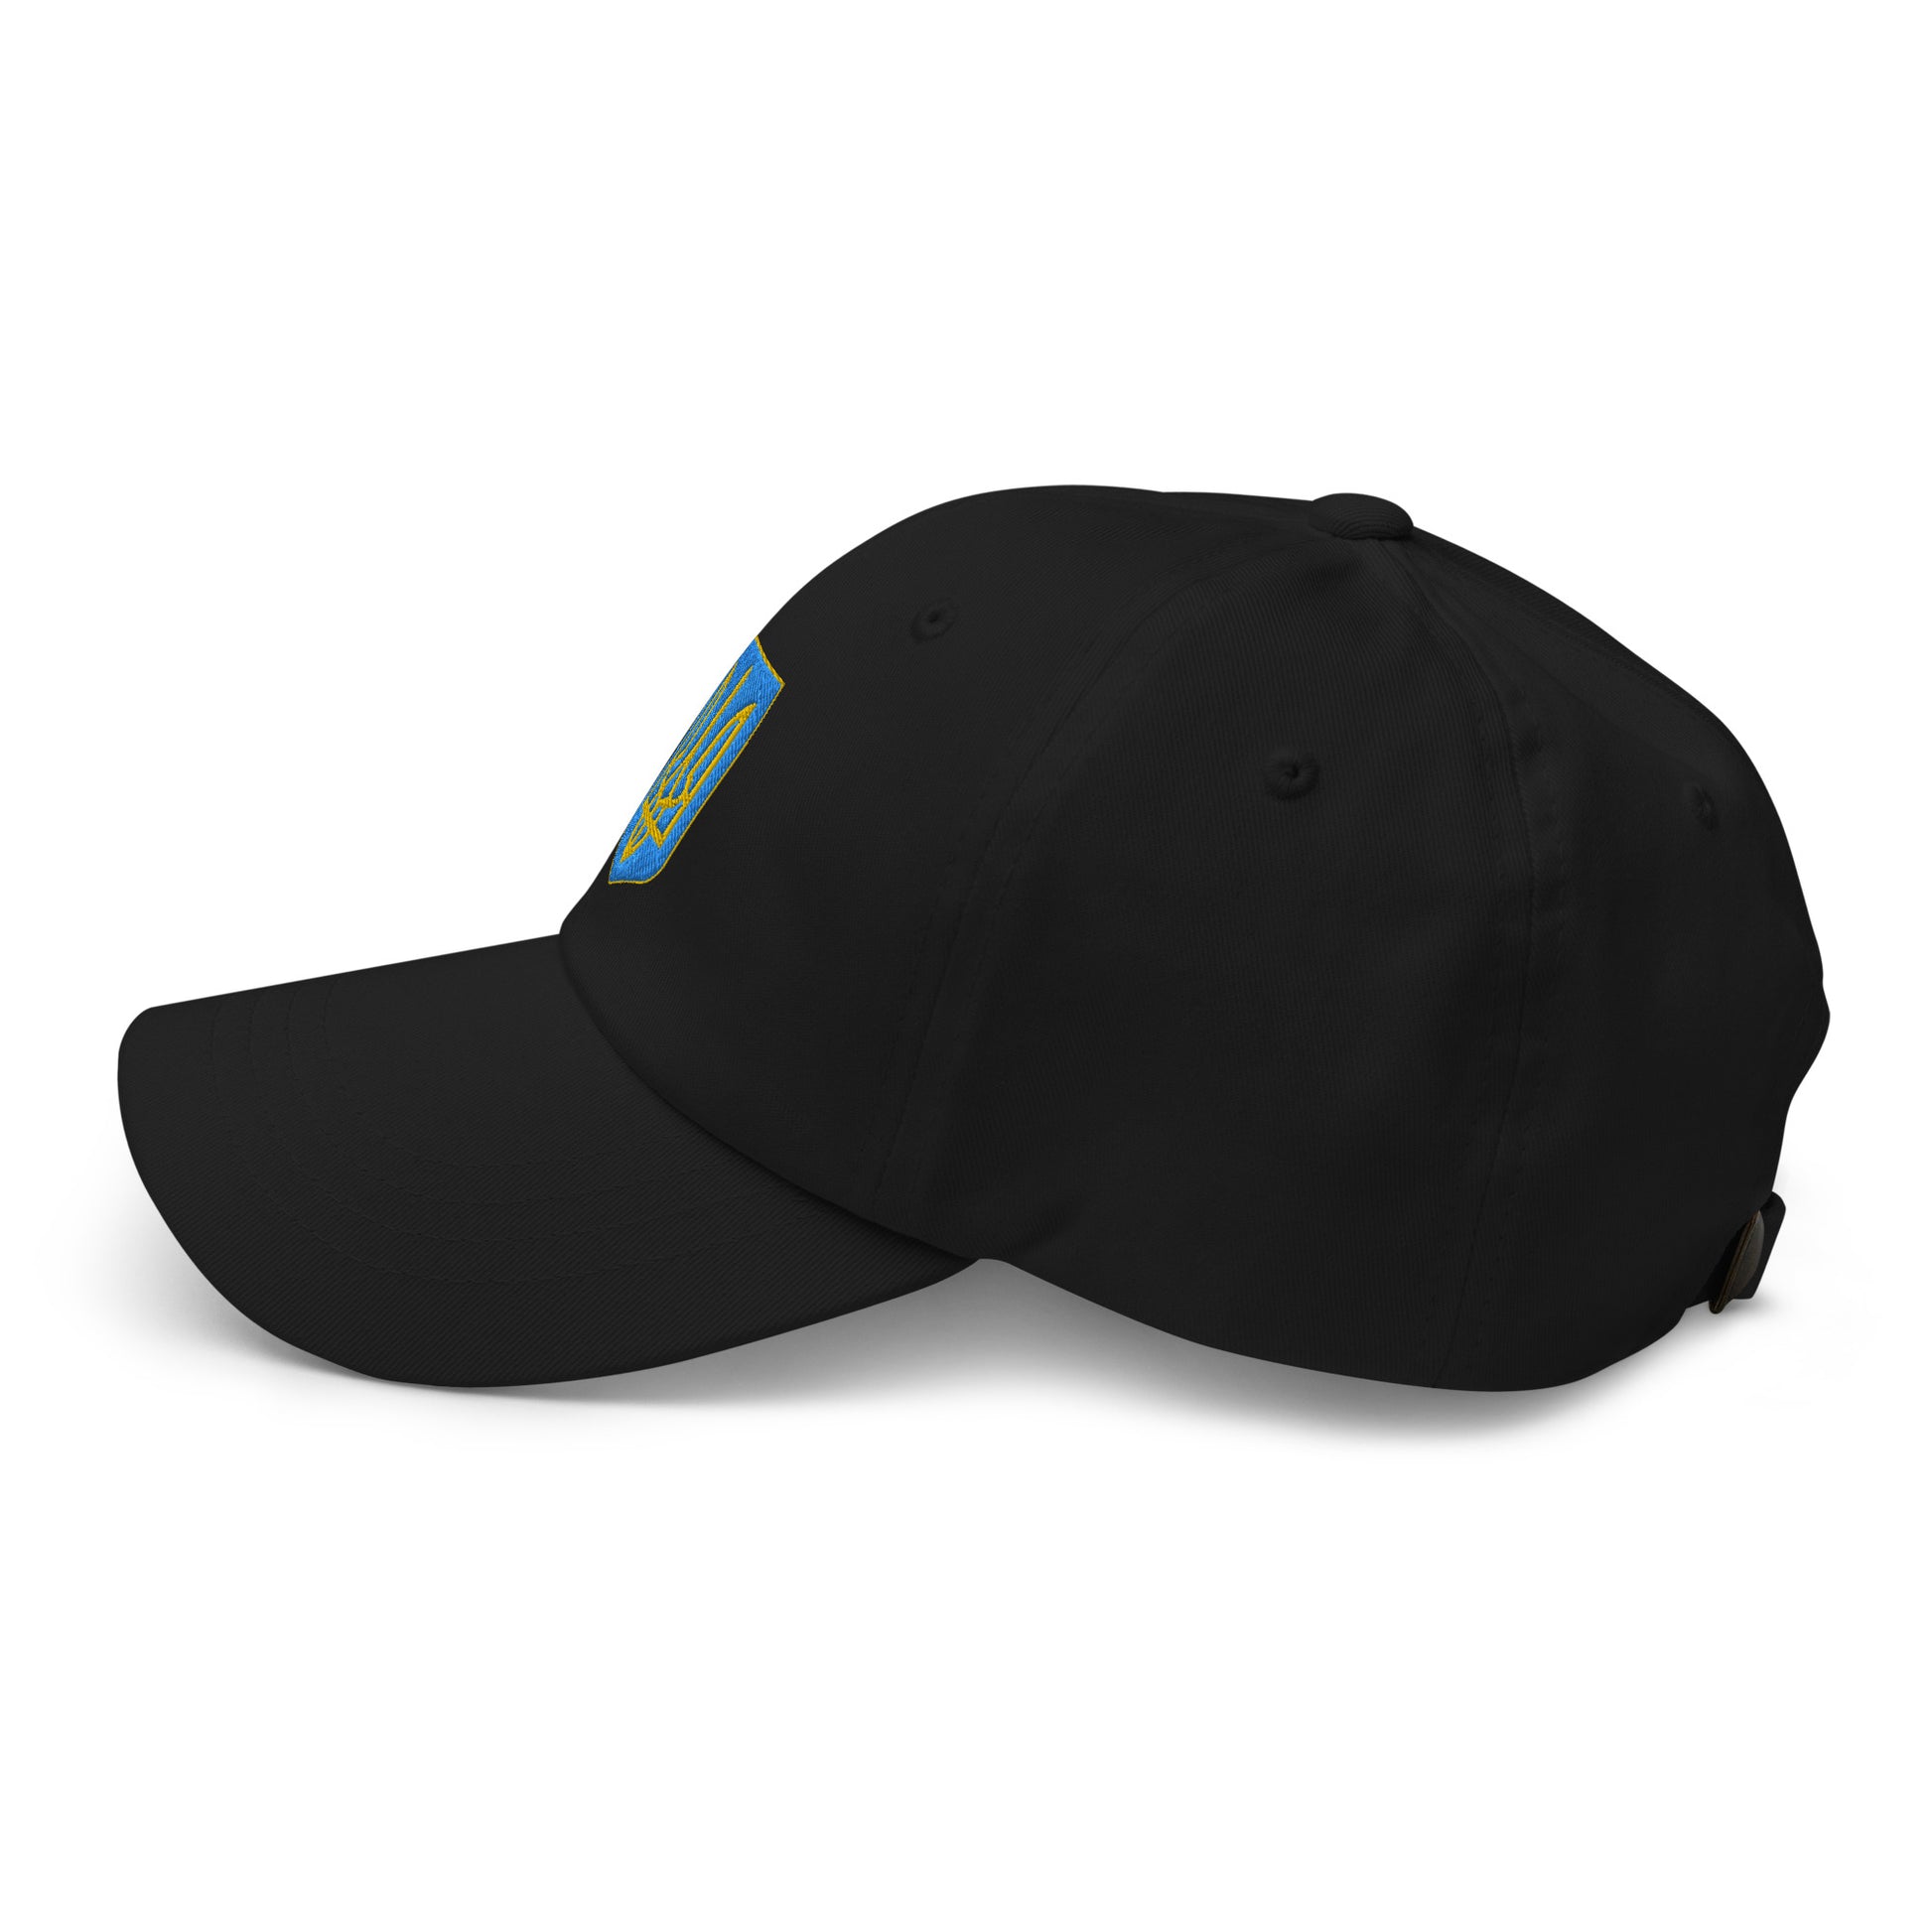 Beautifully embroidered Ukraine Black Dad Hat that makes a statement